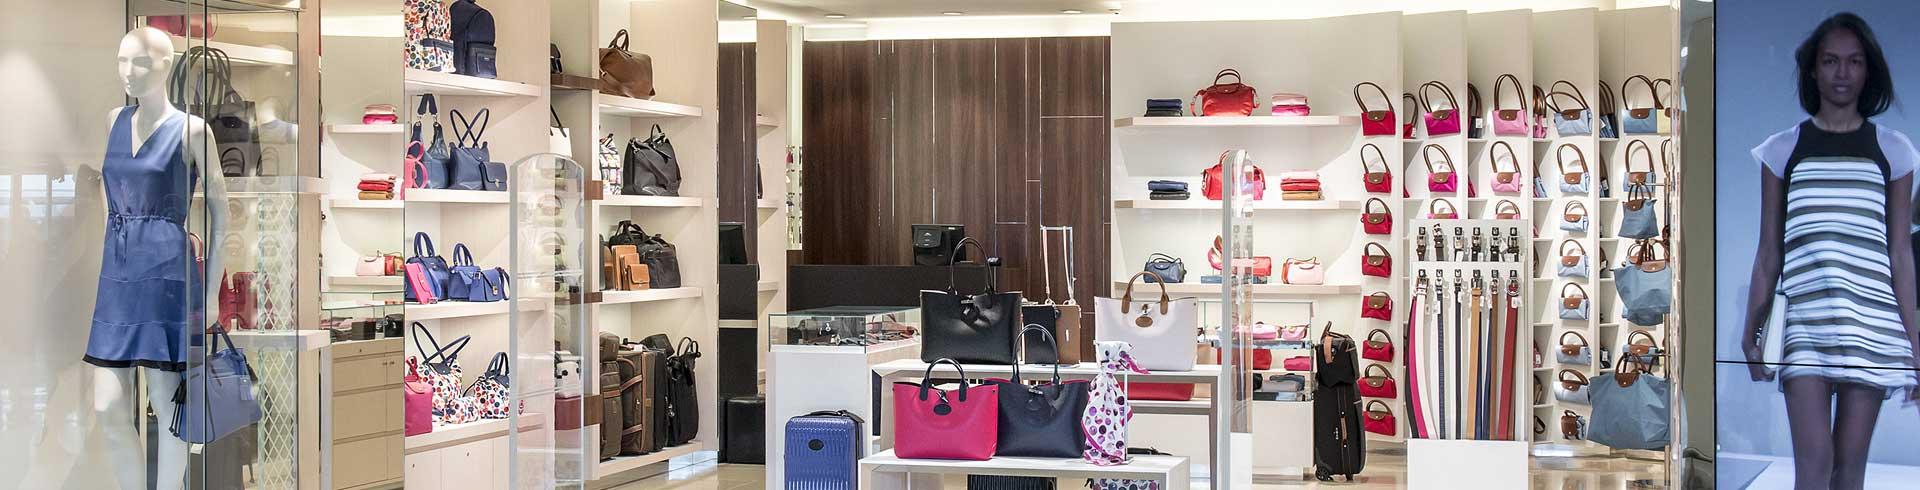 Longchamp Shop at Duty Free Cosmetics Boutiques at the International Airport  at Charles De Gaulle, Paris. Luxury French Brand Editorial Stock Photo -  Image of indoors, airport: 221824703